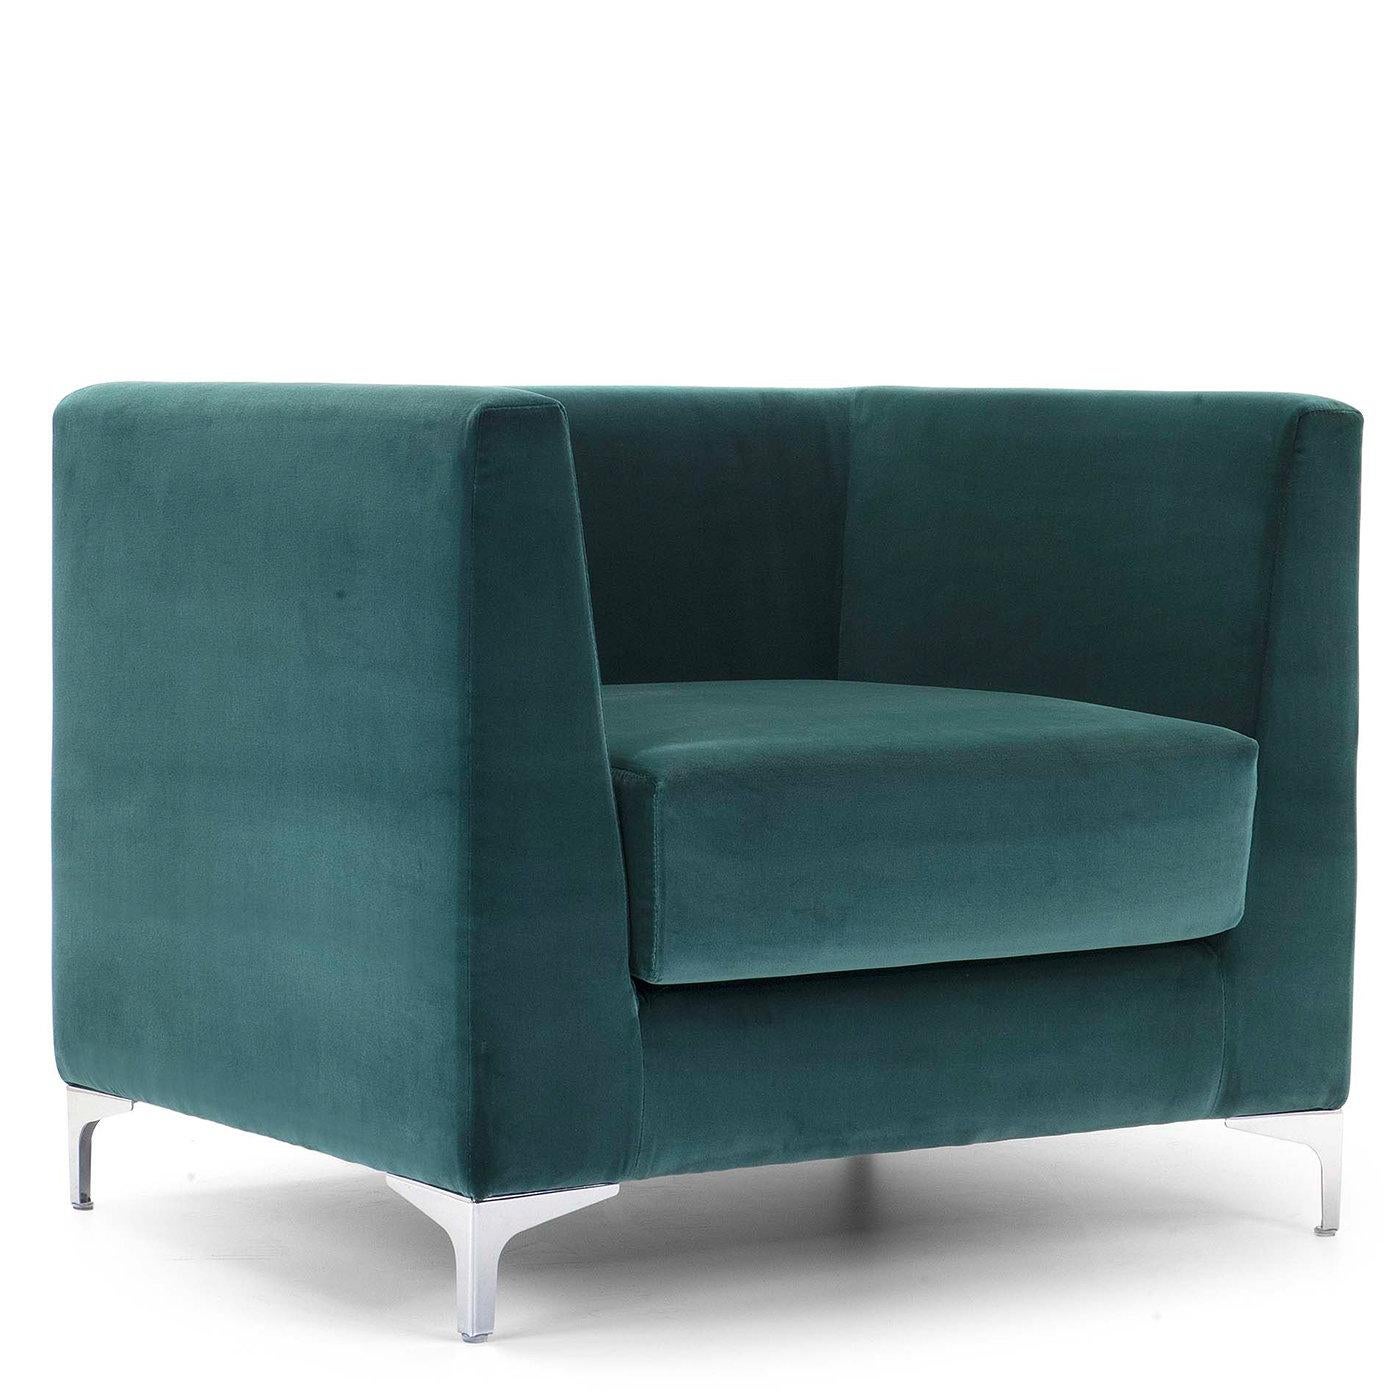 This armchair is luxurious, stylish, and relaxing all at once. Inspired by the classic mid-century cube shape, it boasts an architectural look in a comfortably proportioned size. The lofty silhouette is wrapped in a superb blue-green dacron